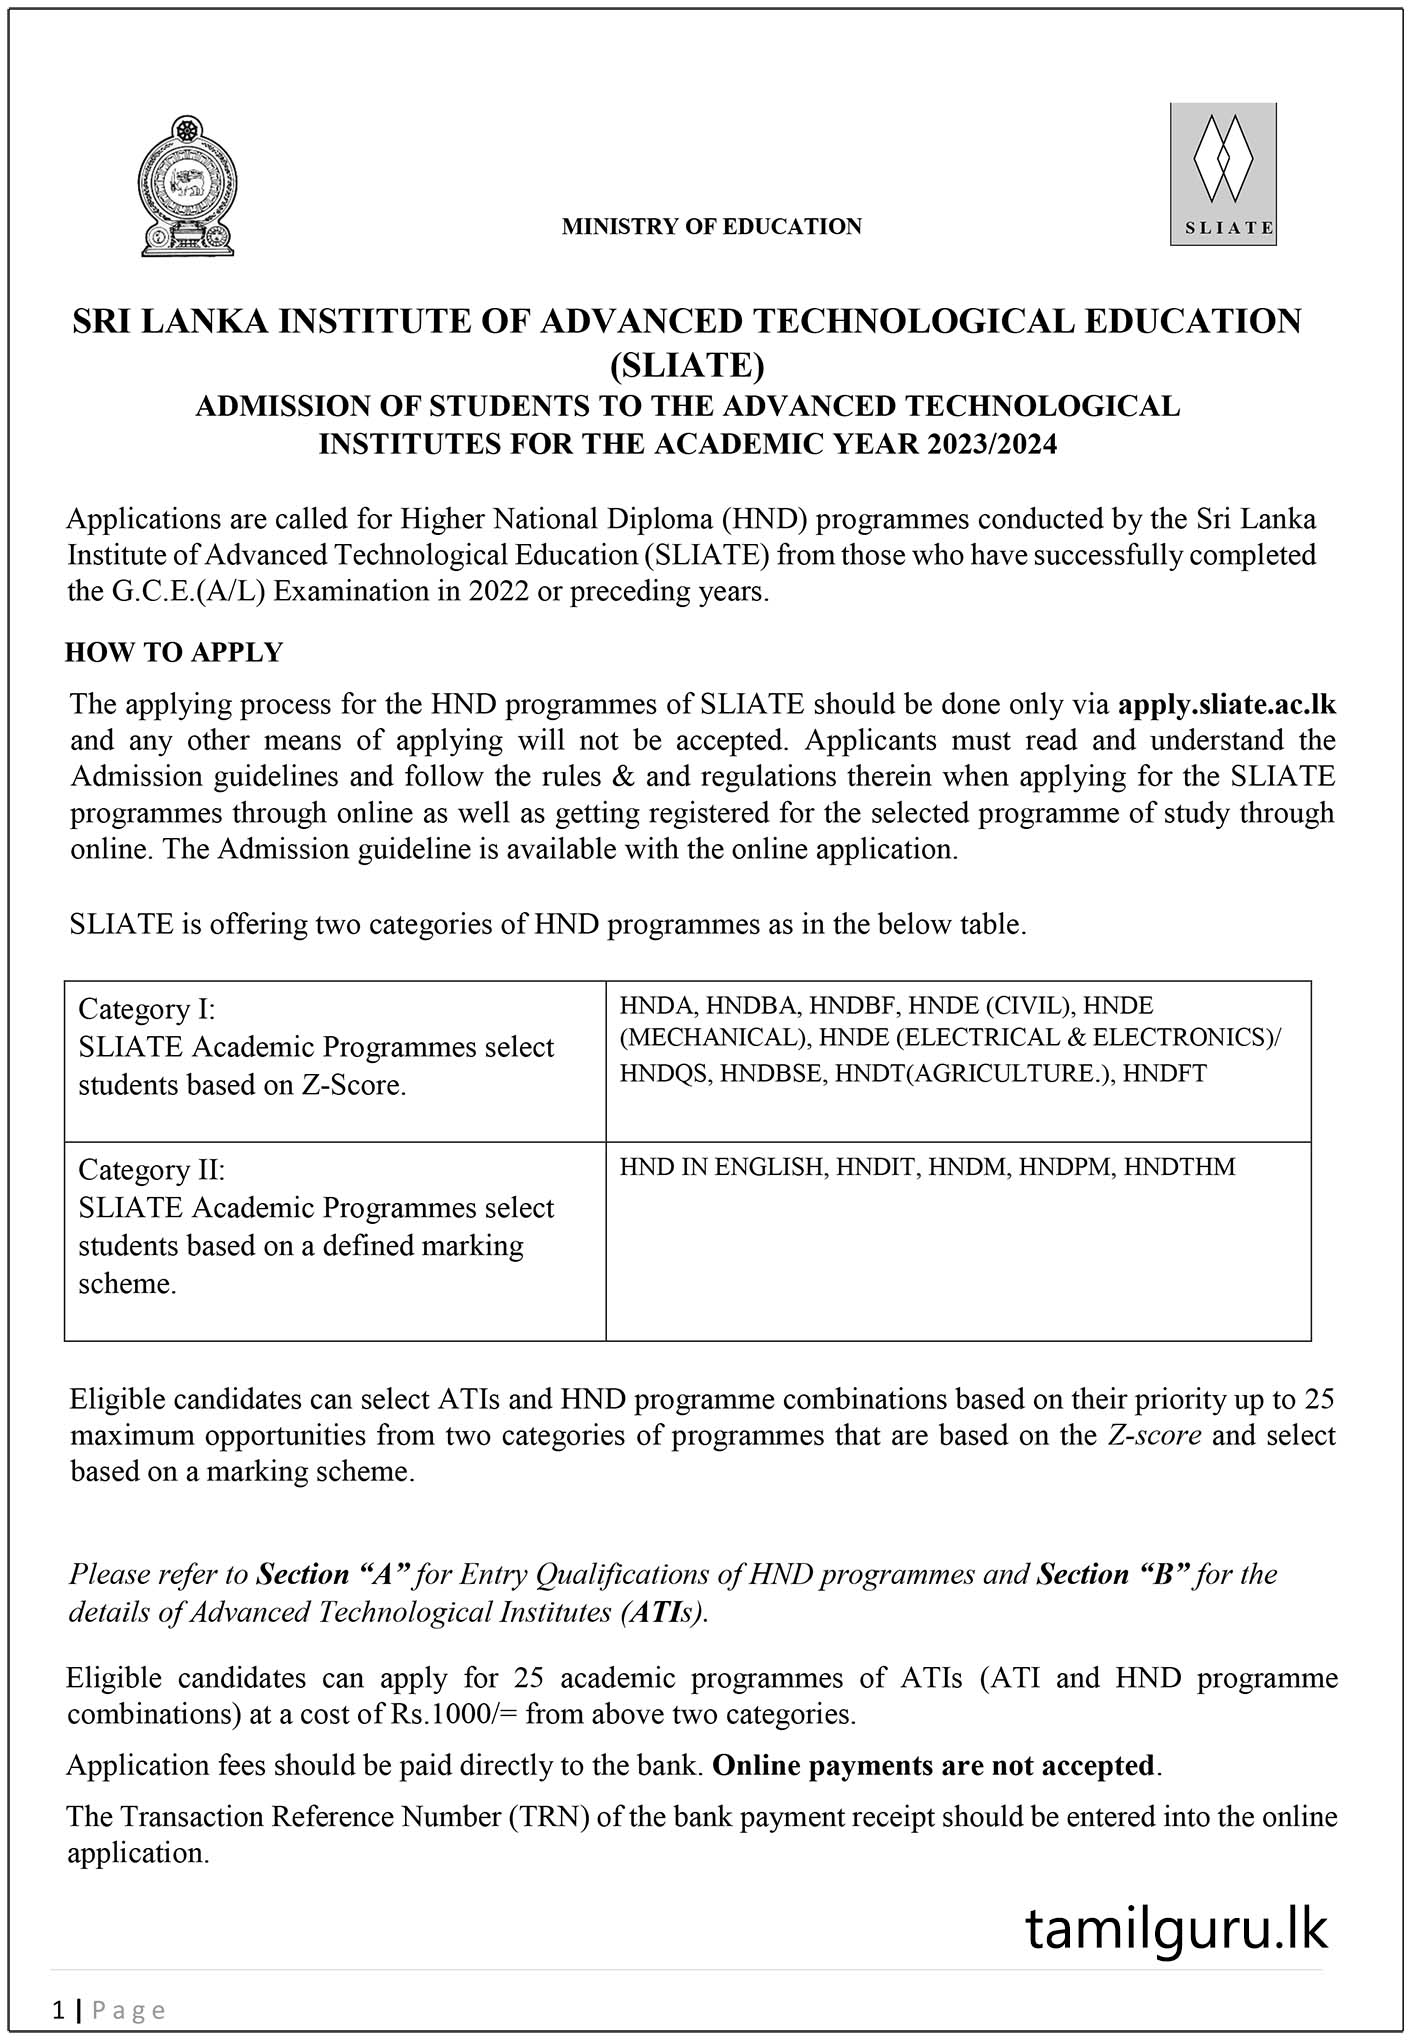 Calling Applications for Admission of Students to Higher National Diploma (HND) Courses (Academic Year - 2023/2024) Conducted by the Sri Lanka Institute of Advanced Technological Education (SLIATE), Ministry of Education